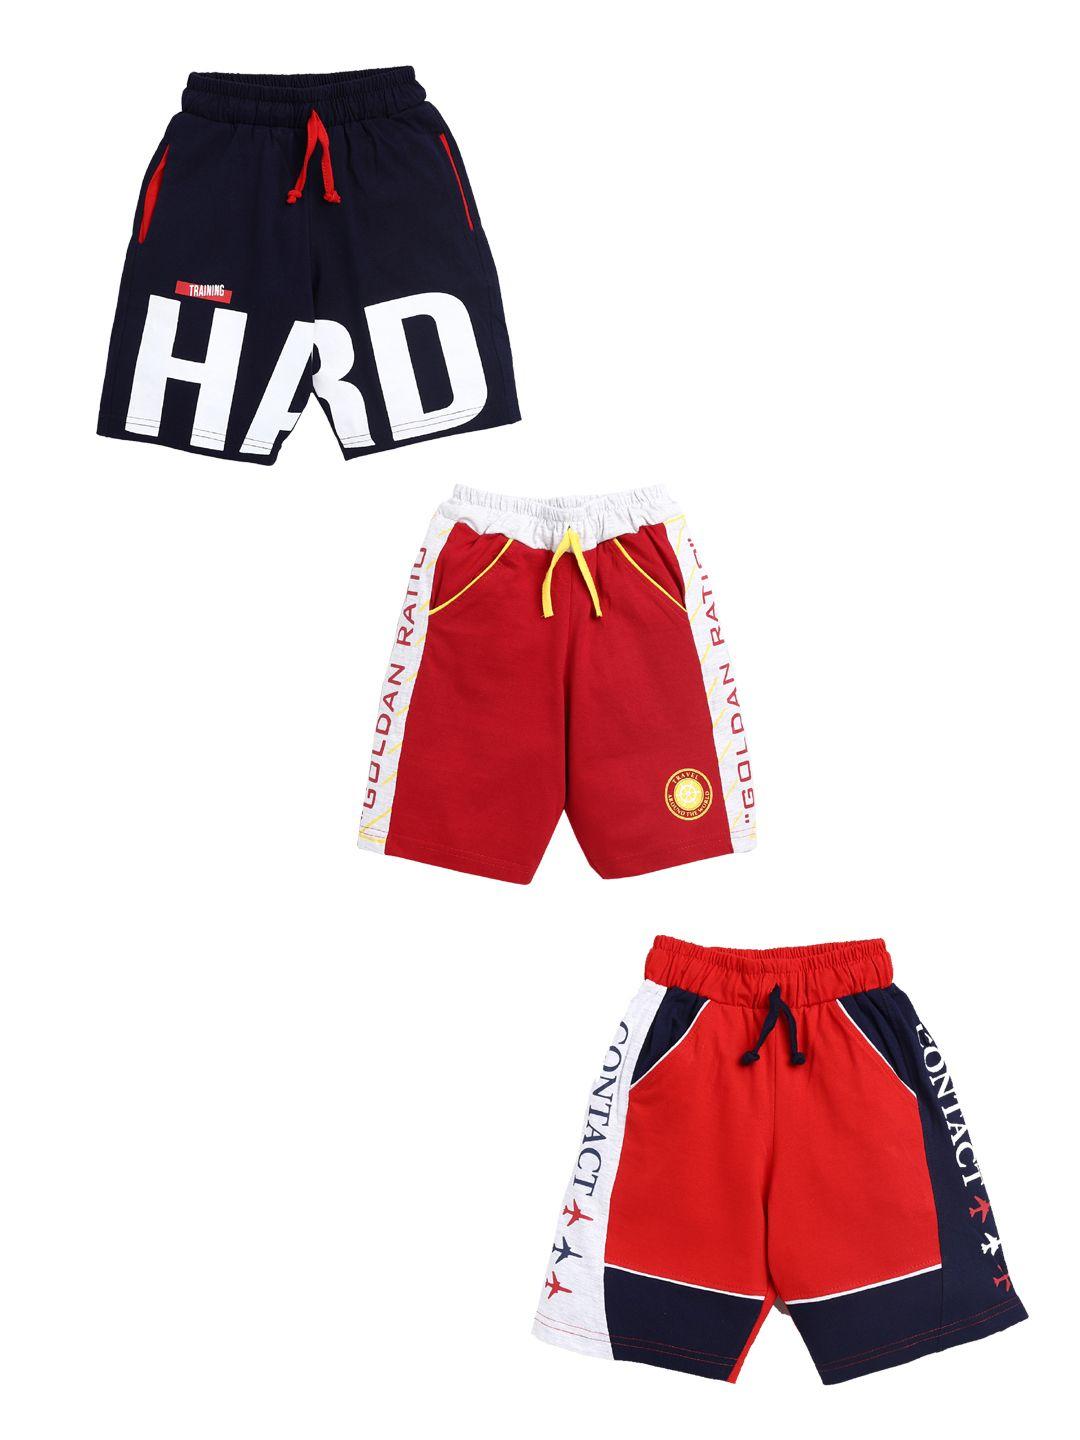 todd n teen pack of 3 boys navy blue & red printed cotton shorts